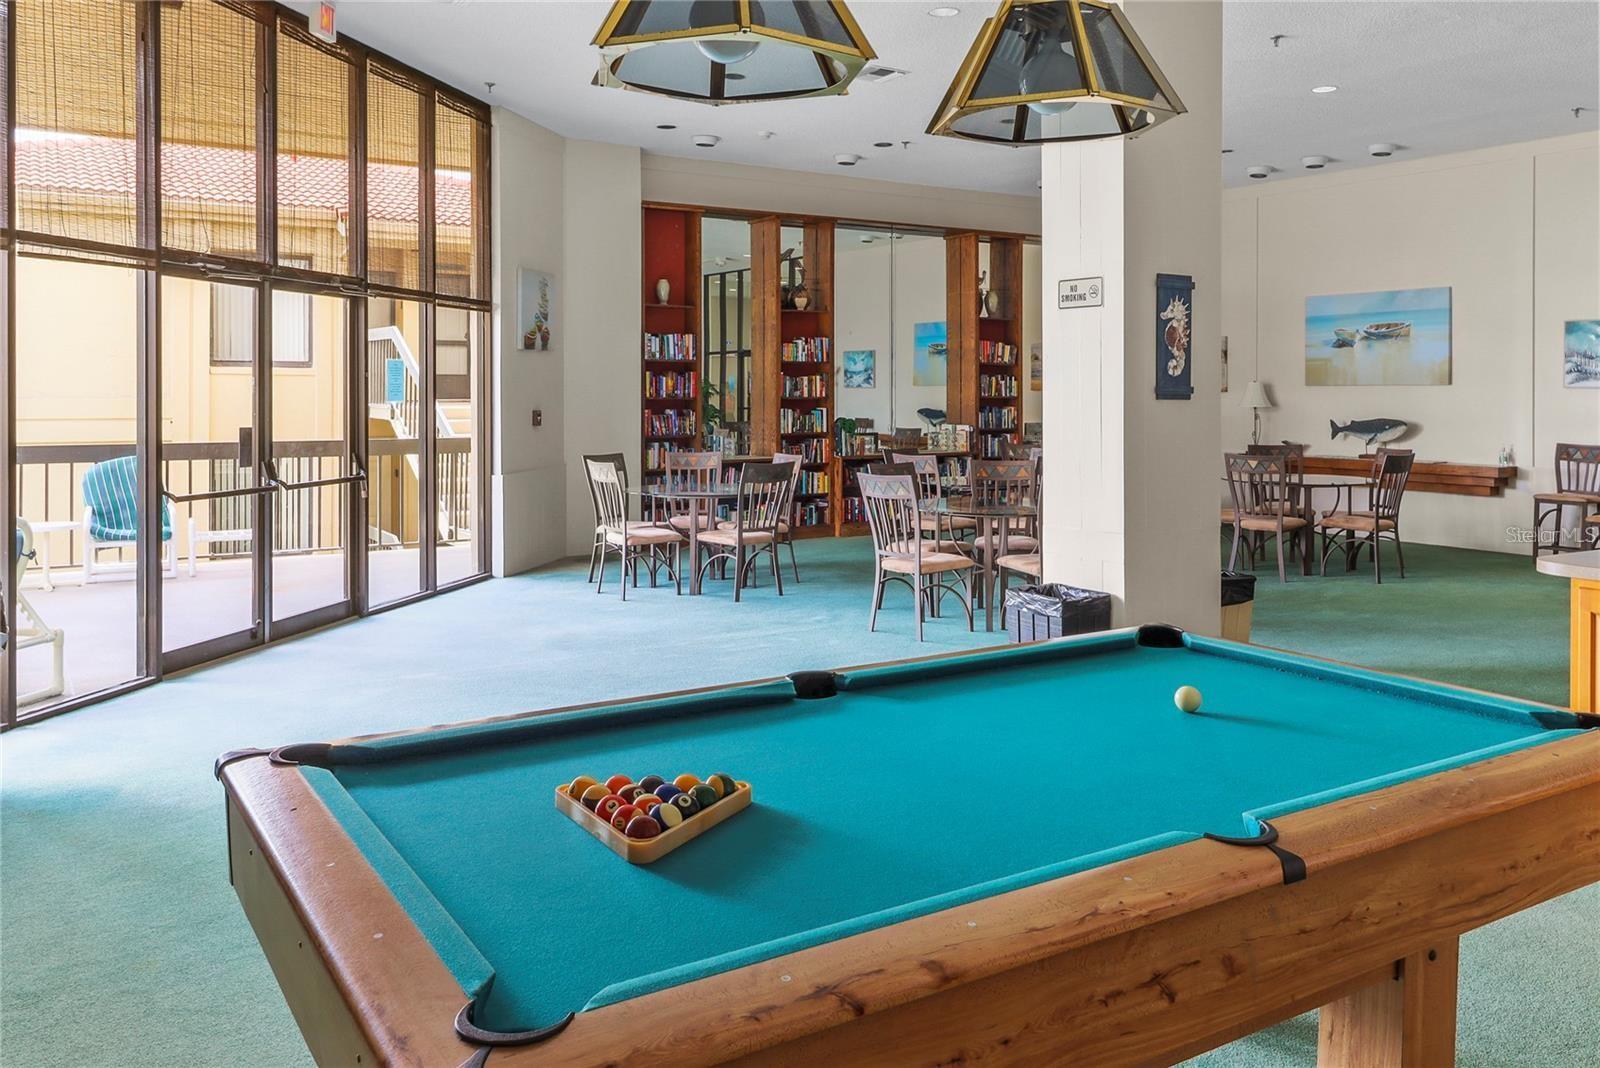 Play, Party, Watch some TV, Read a book - This Rec Room is equipped to handle plenty to do if your entertaining a small group, or having visitors and you need the extra space to keep everyone busy!!